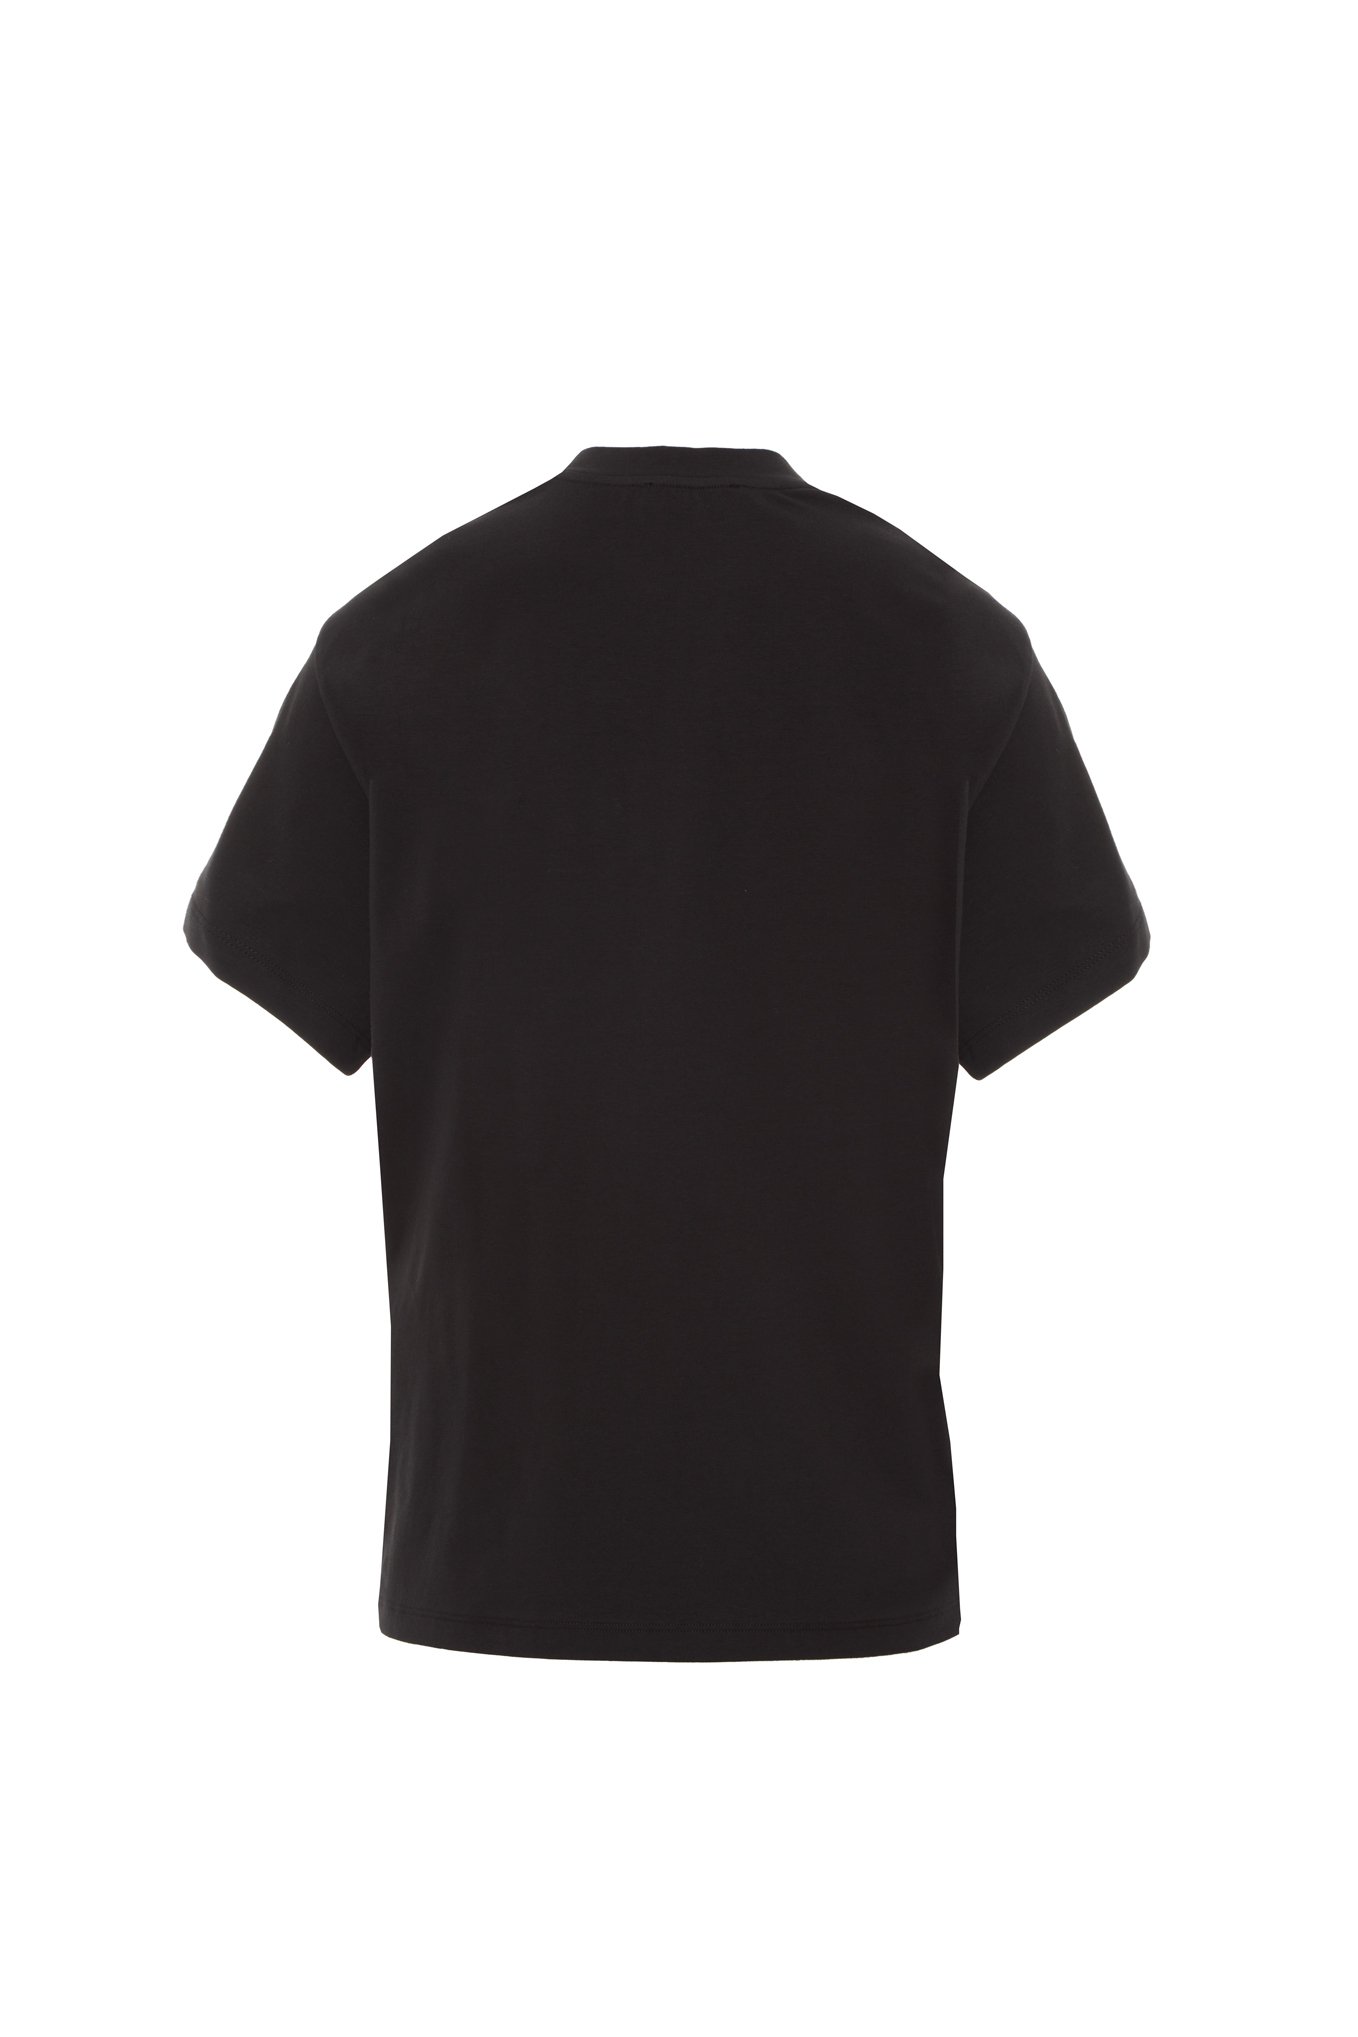 Basic Black Tshirt With Applique Embroidery Detail - Gizia